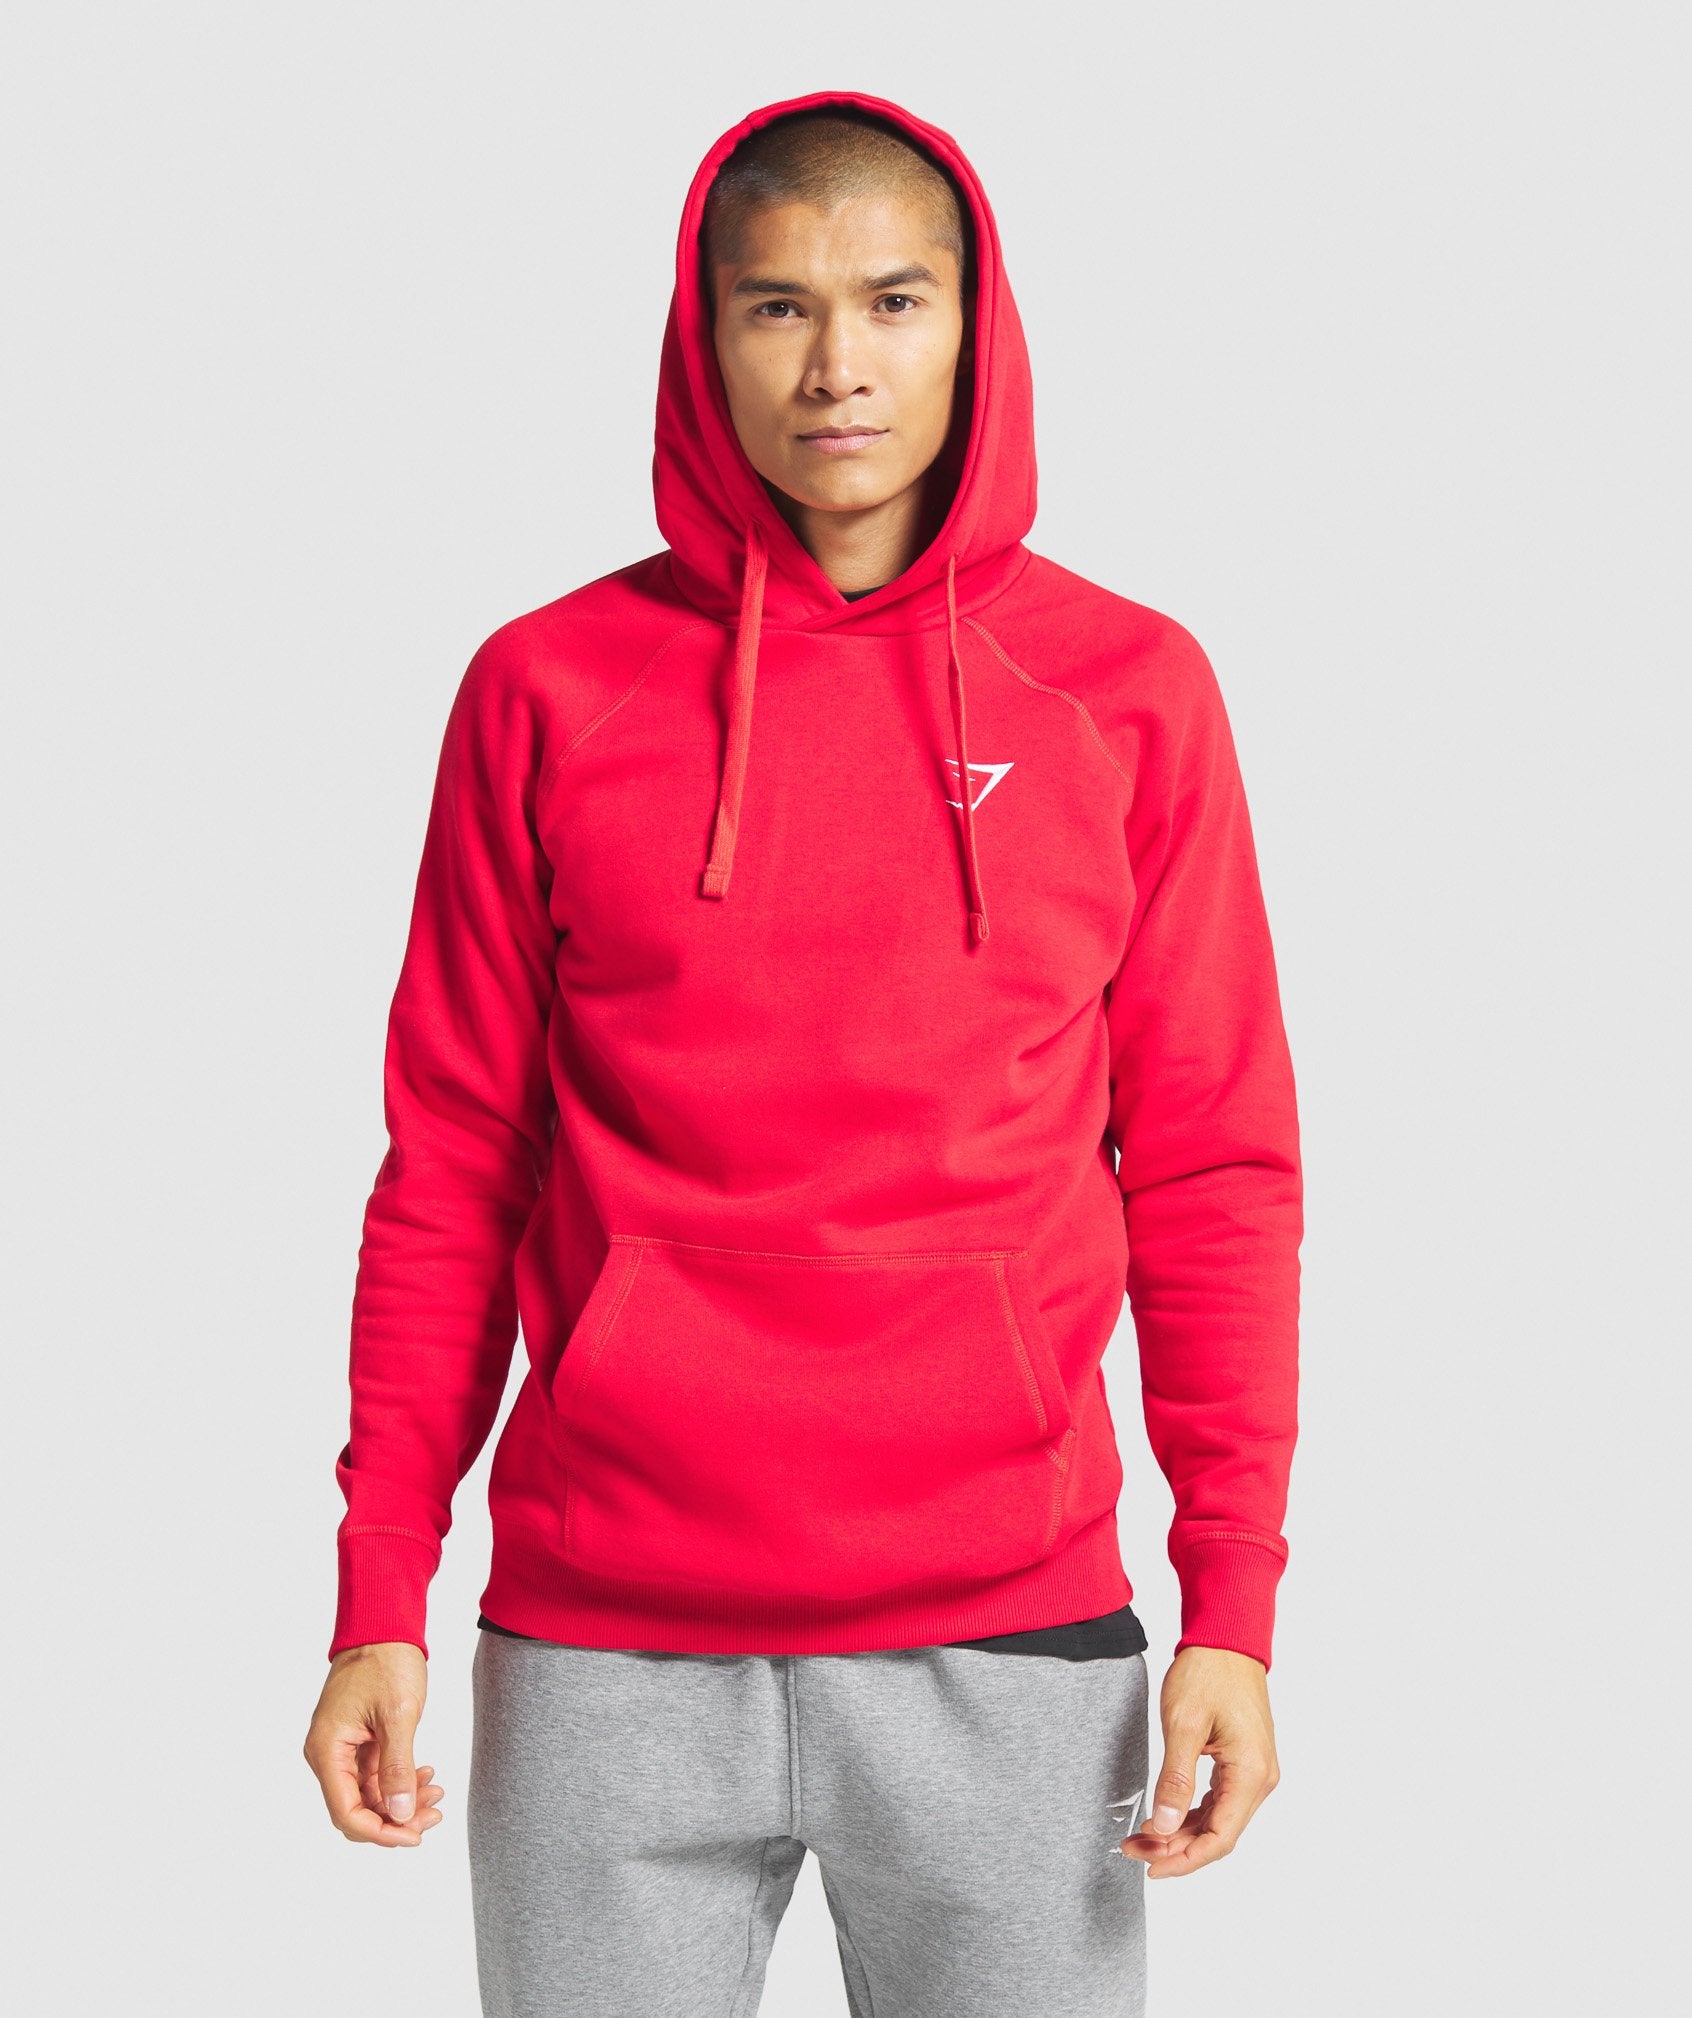 Crest Hoodie in Red - view 1